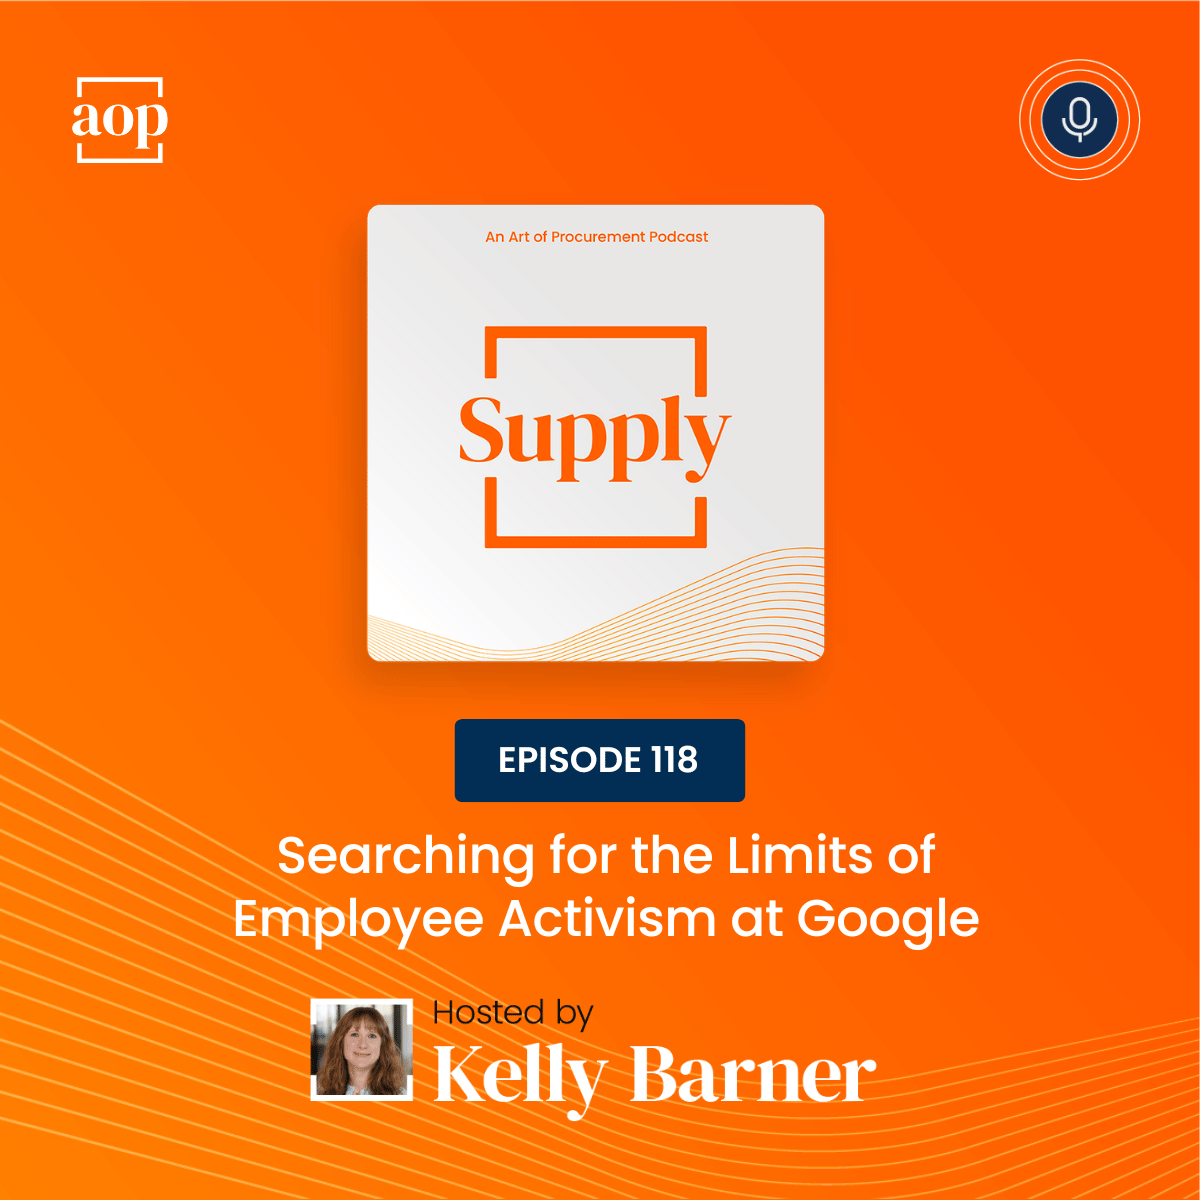 Searching for the Limits of Employee Activism at Google - Now playing on @artofsupply artofprocurement.com/supply/searchi…